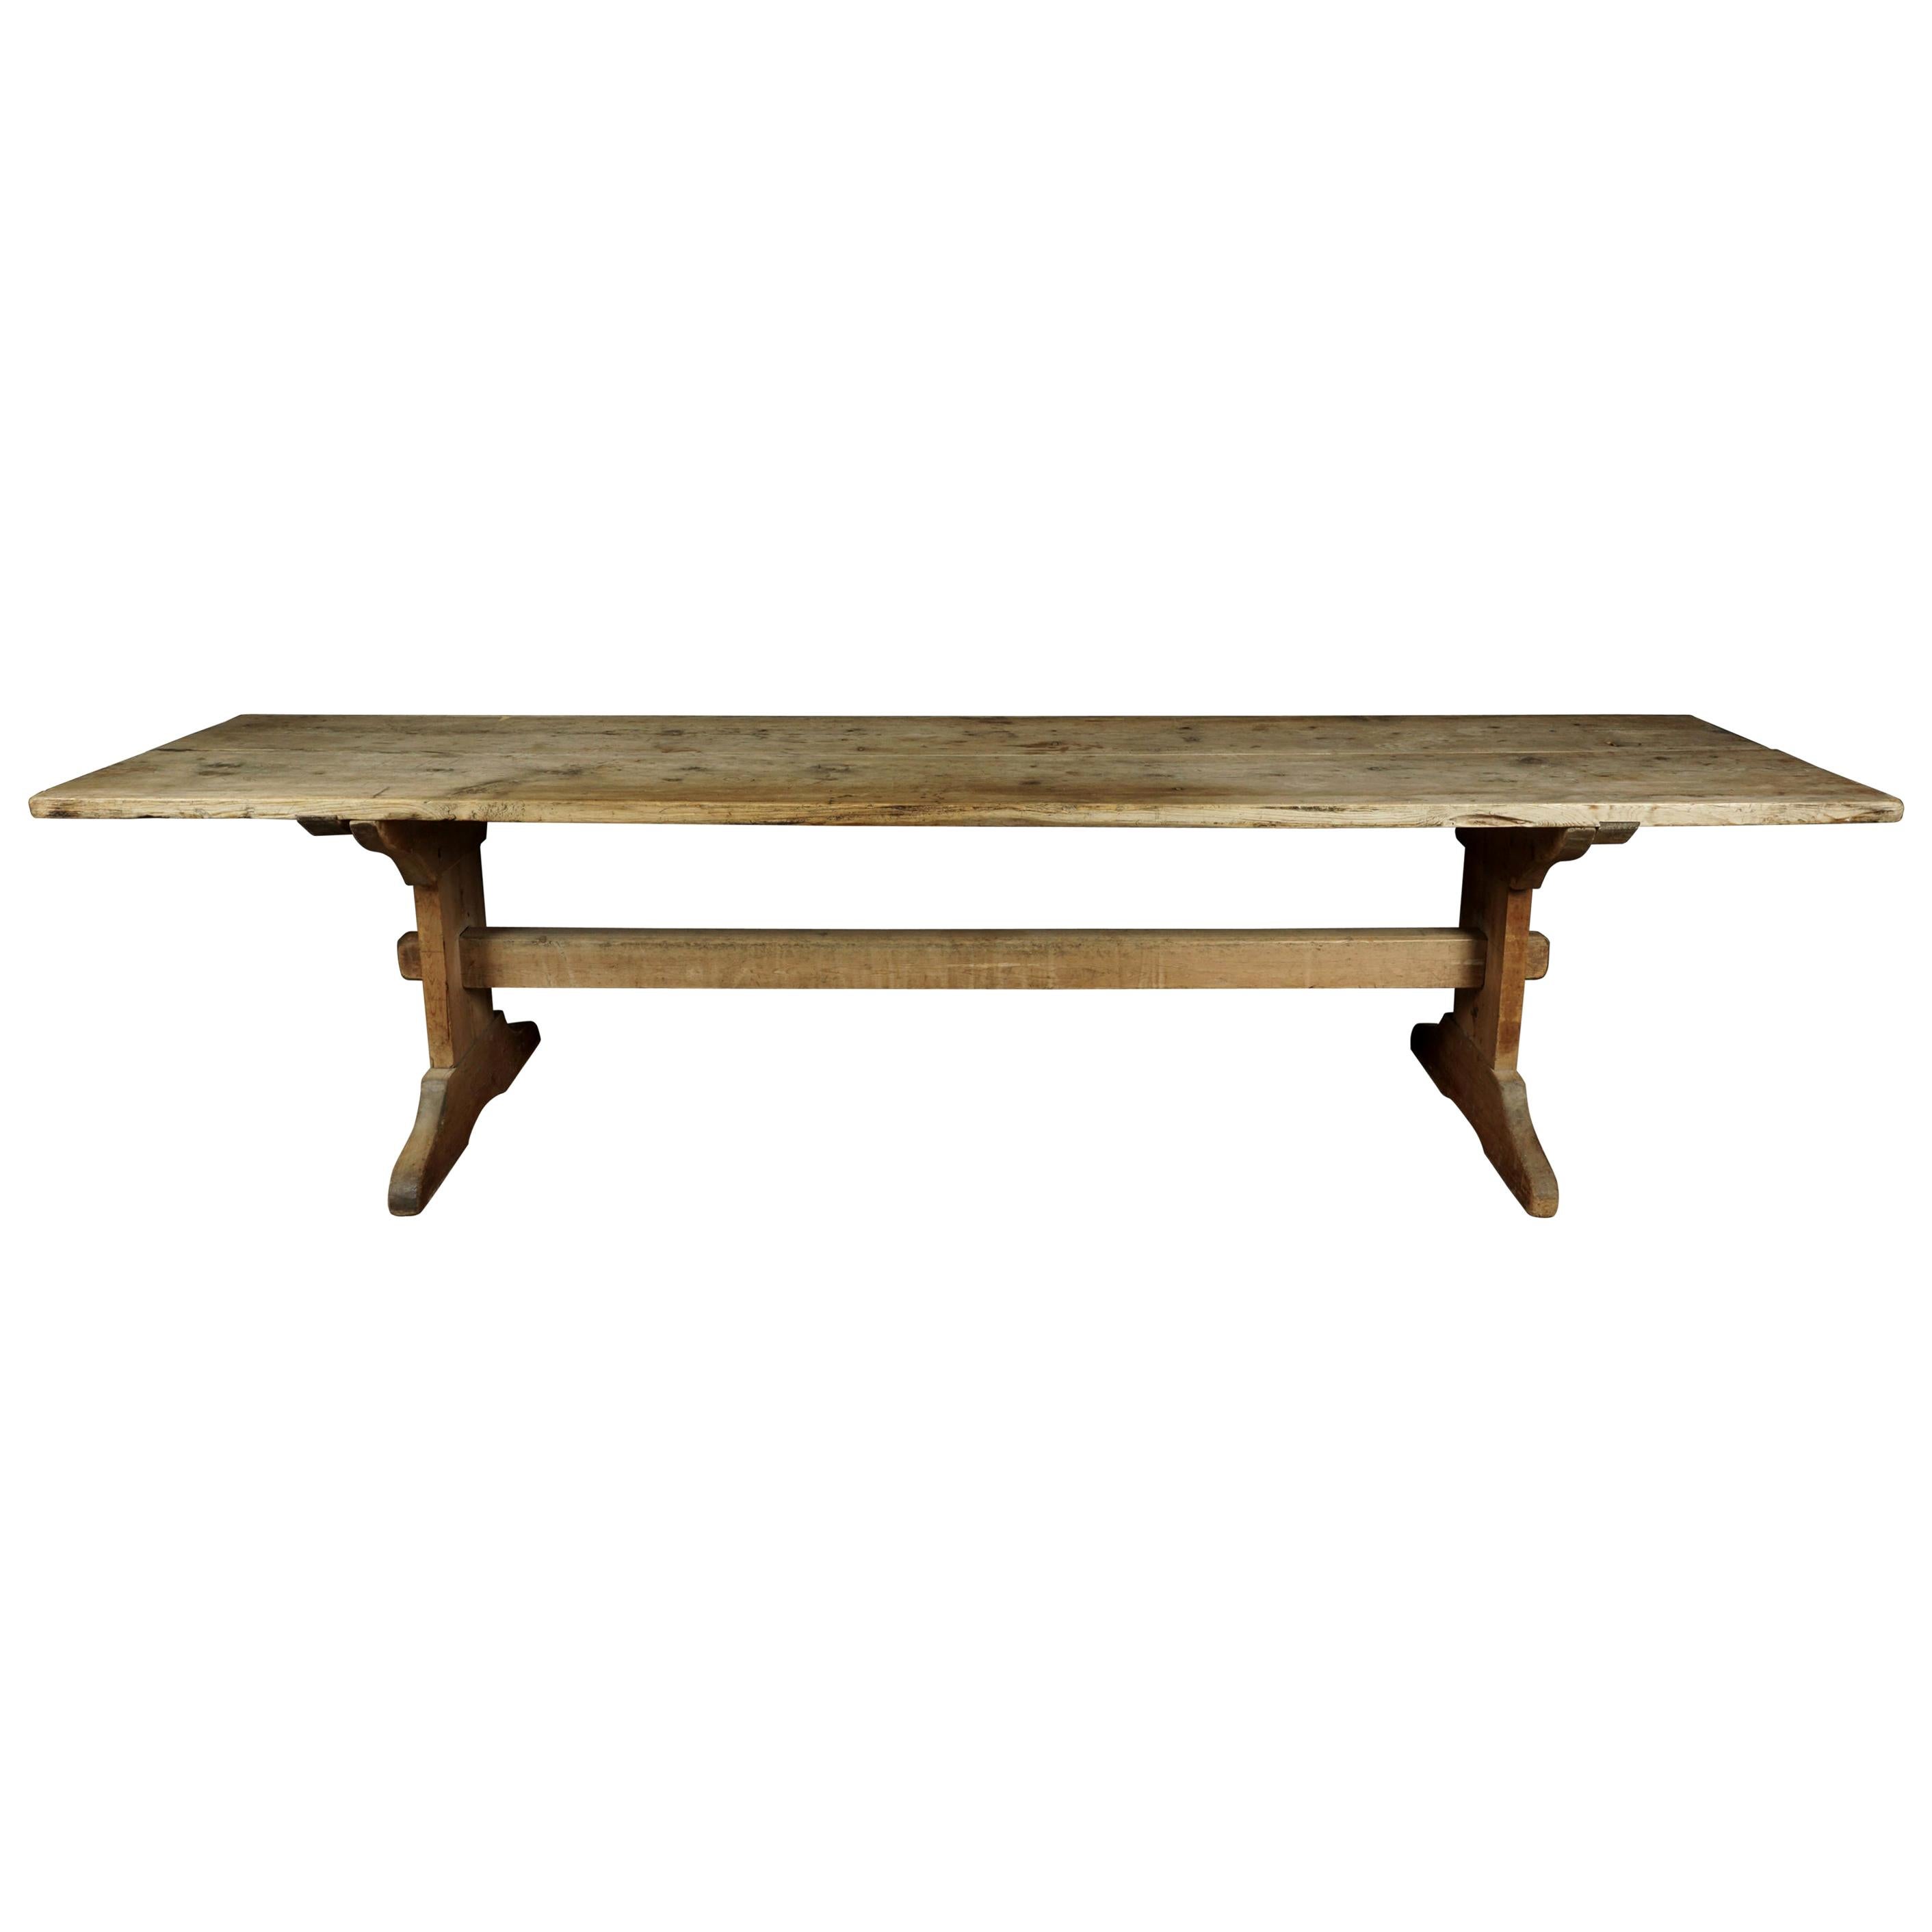 Rare Large Pine Bockbord Dining Table from Norway, circa 1800